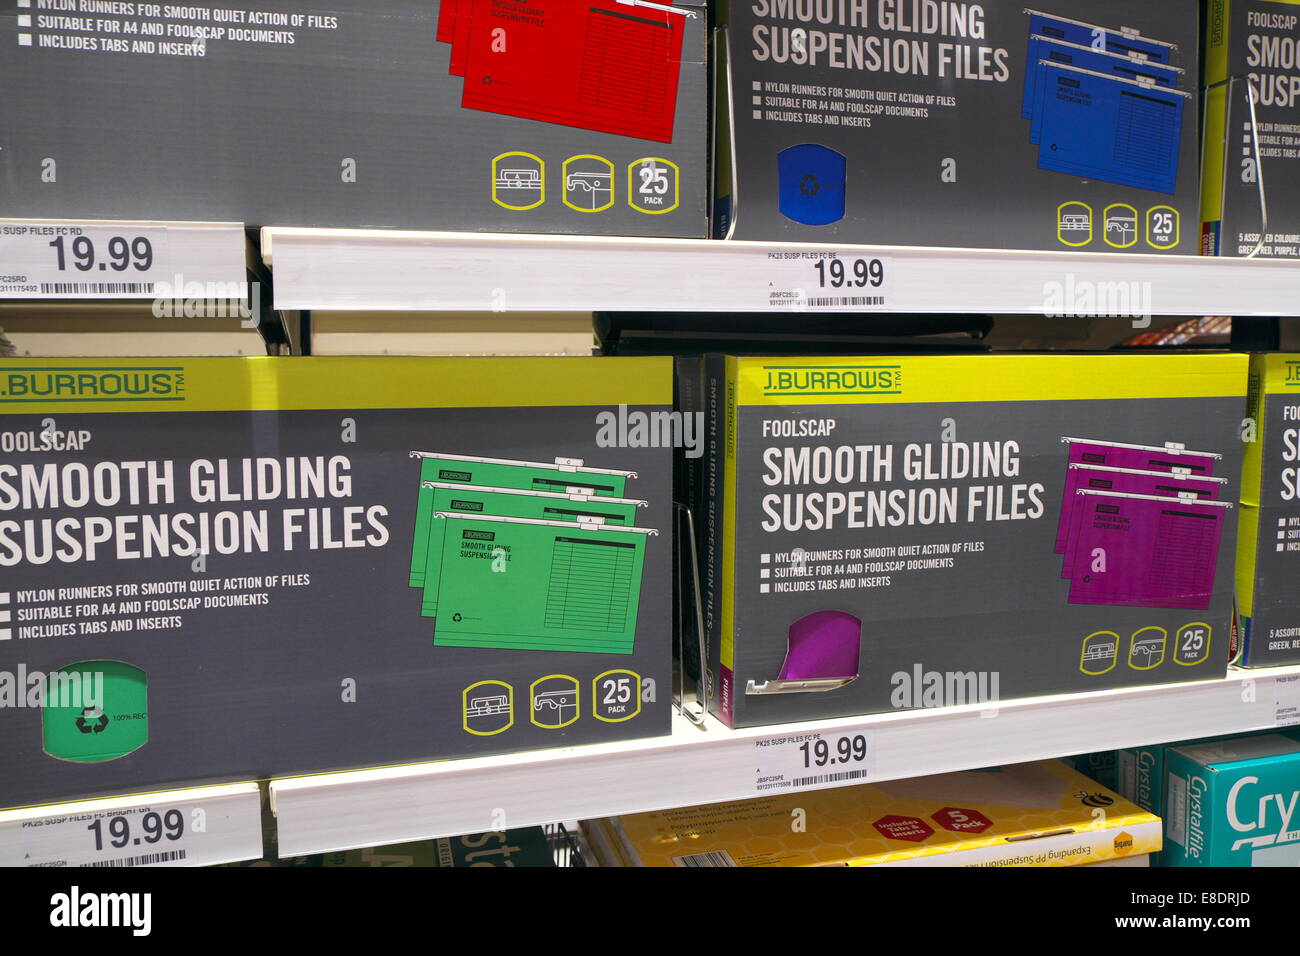 smooth gliding suspension files for sale in an australian stationery store shop Stock Photo